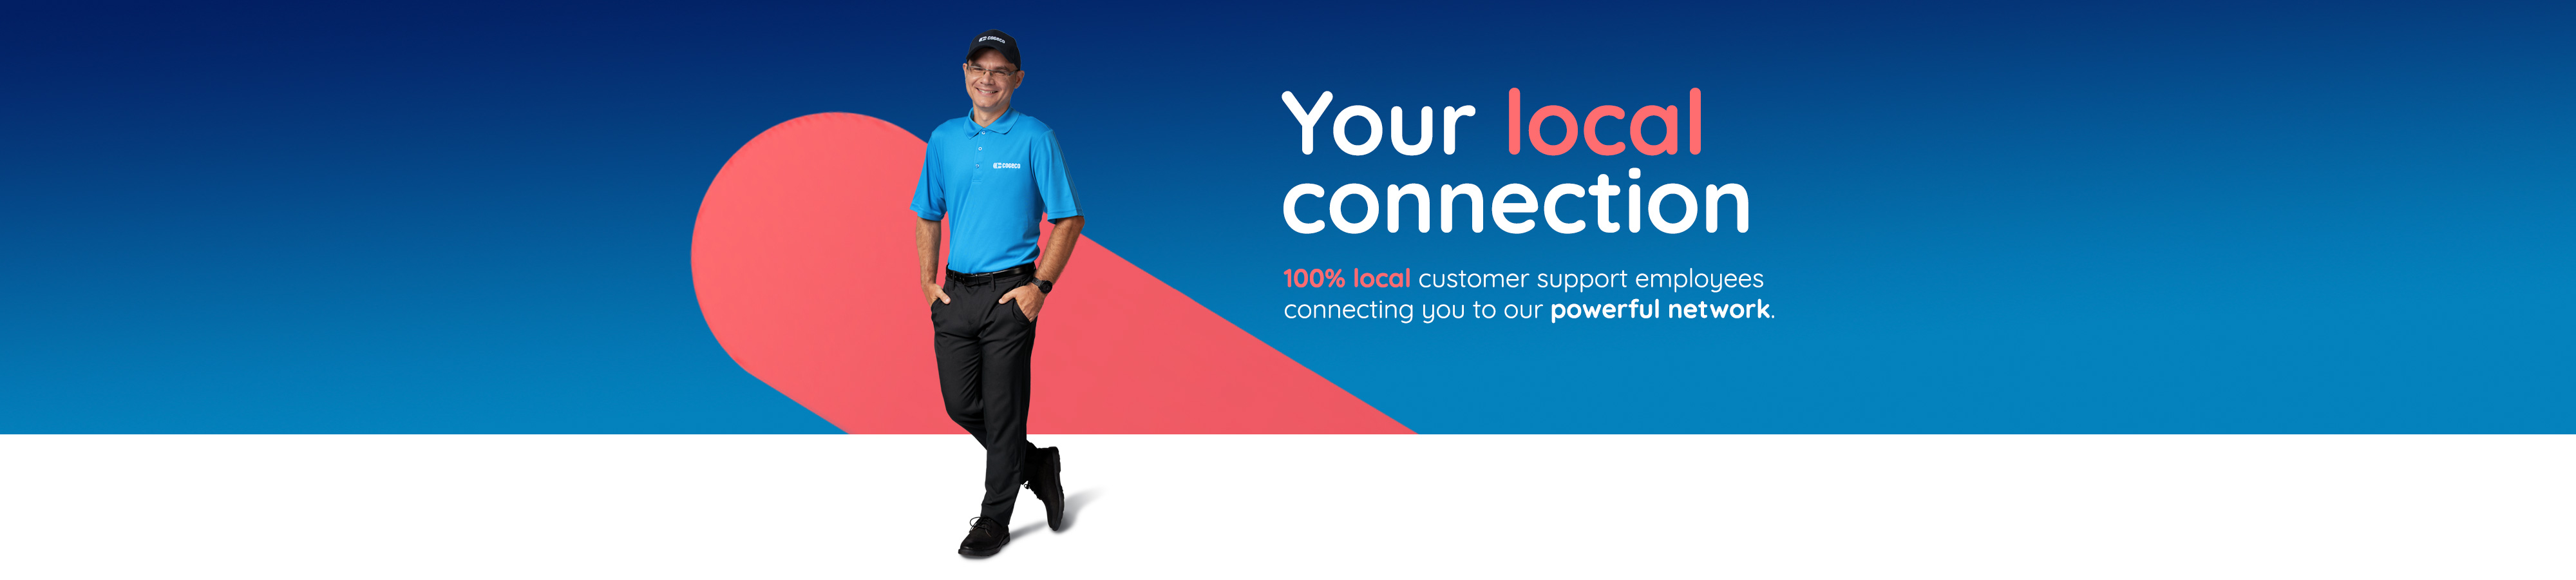 Your local connection. 100% local customer support employees connecting you to our powerful network.